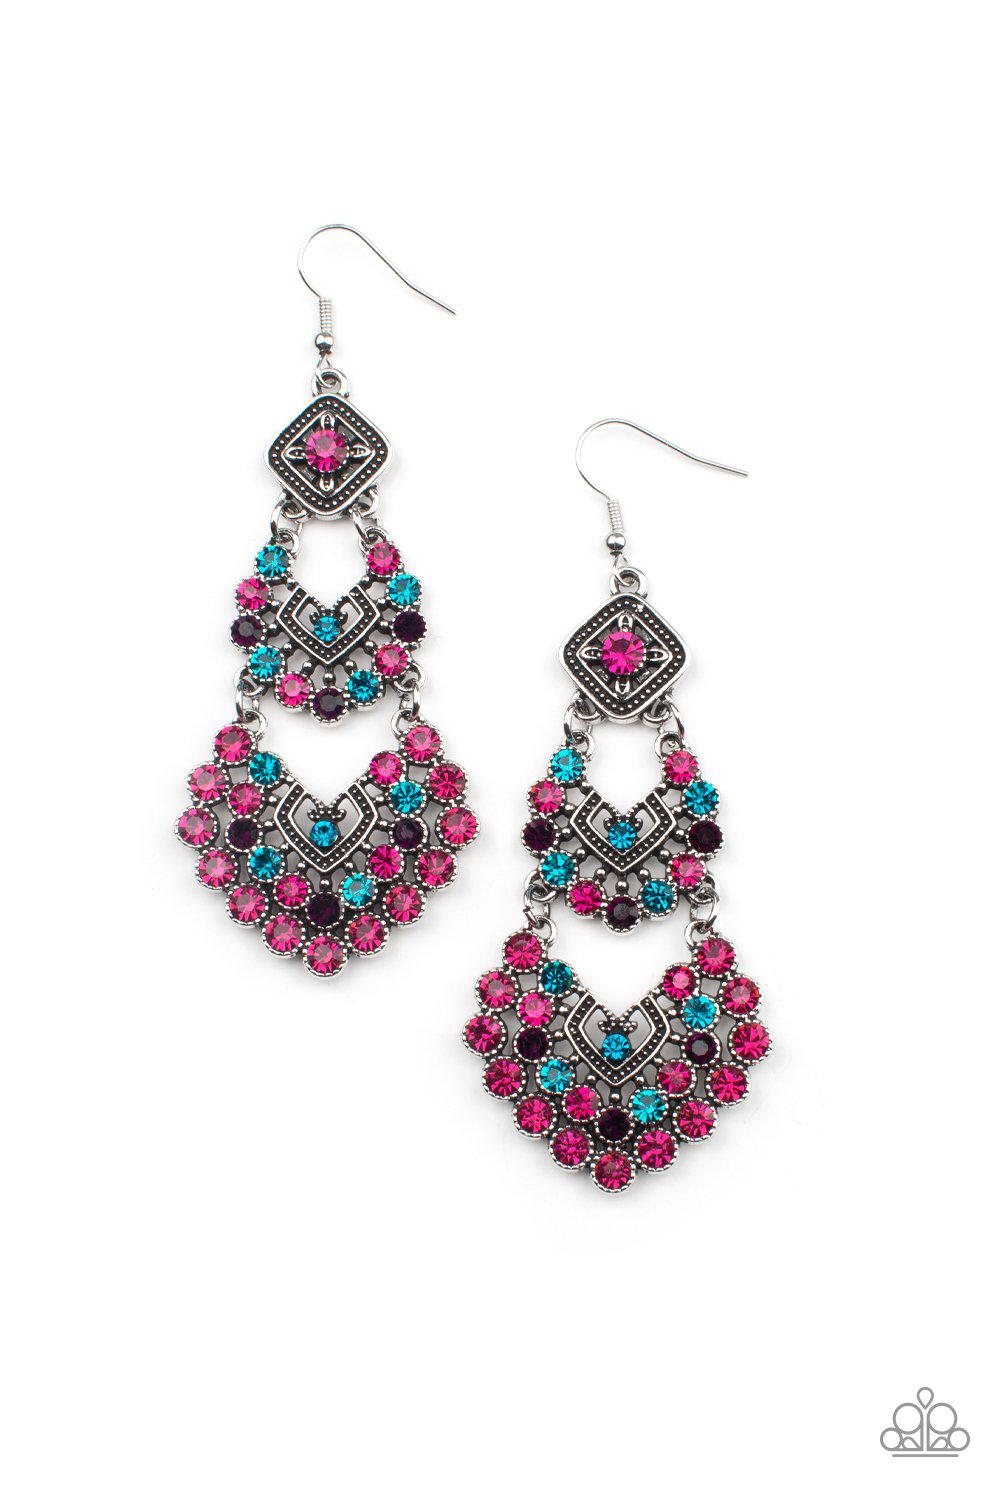 A Finishing Touch Jewelry - Paparazzi Castle Chic - Pink